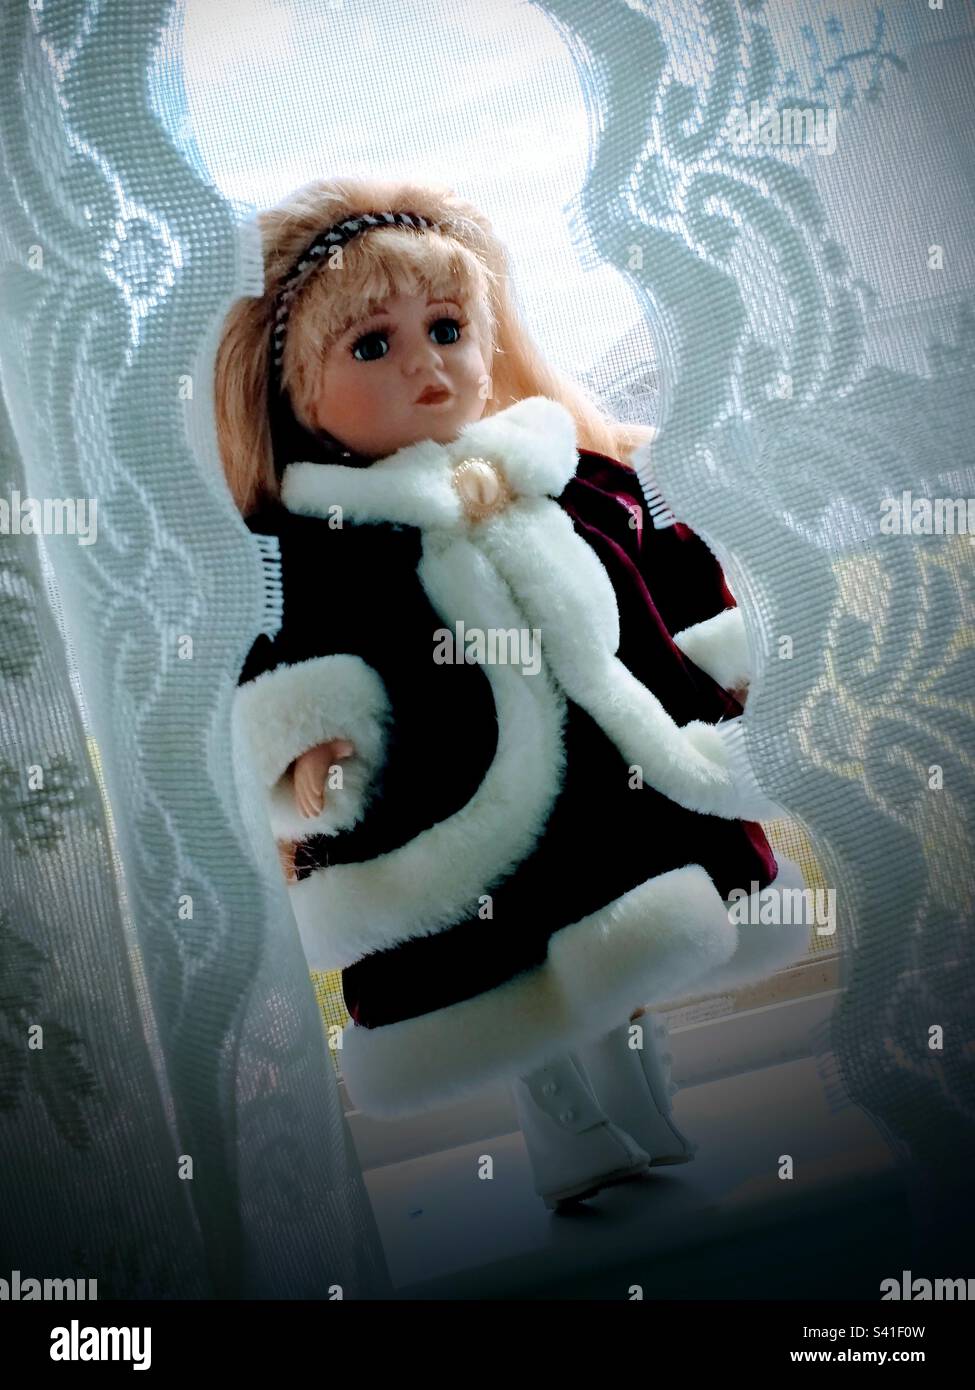 A porcelain doll dressed in a dark red, velvet dress & coat (both trimmed in white faux fur), white boots, & a striped head band. She stands on a window sill, surrounded by white lace curtains. Stock Photo